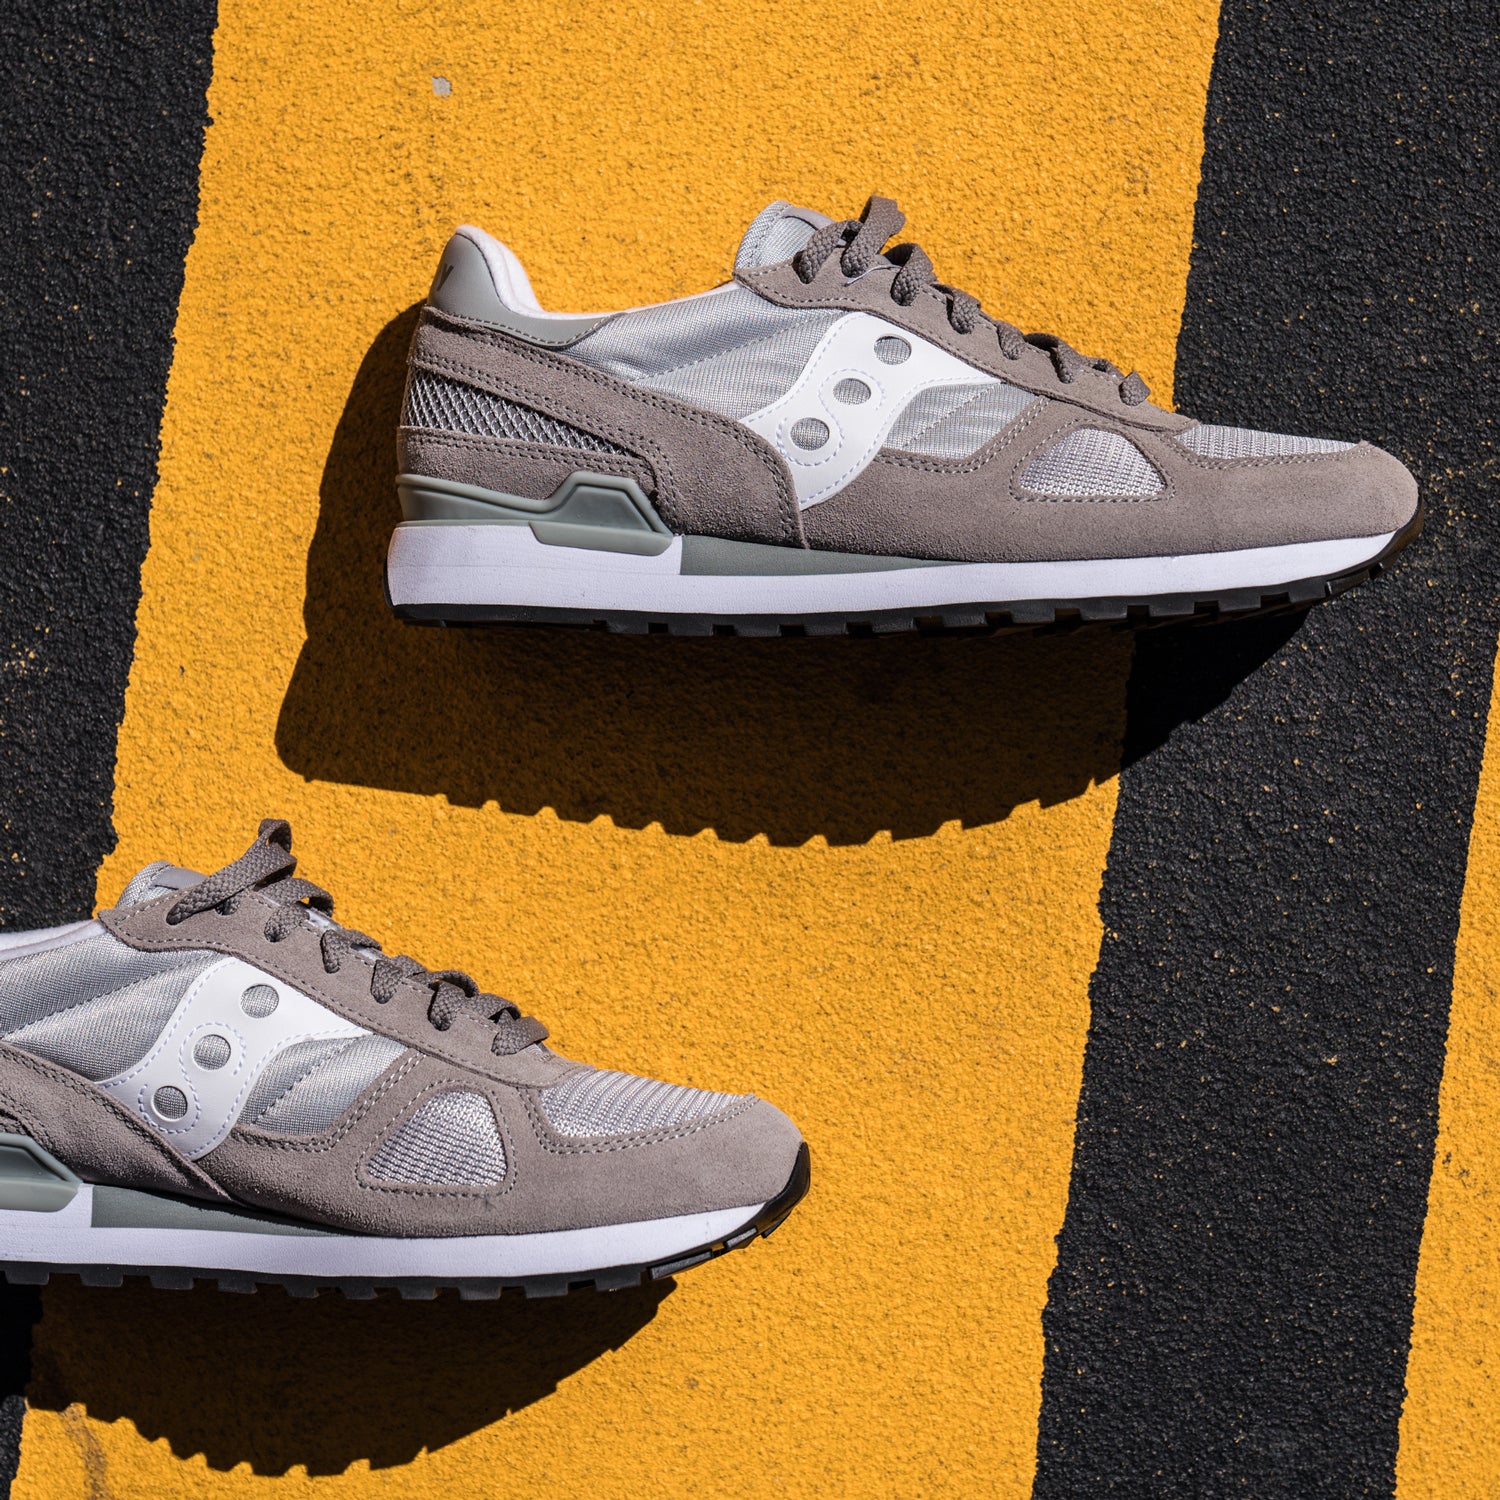 The Saucony Shadow Original Is the Best Everyday Shoe